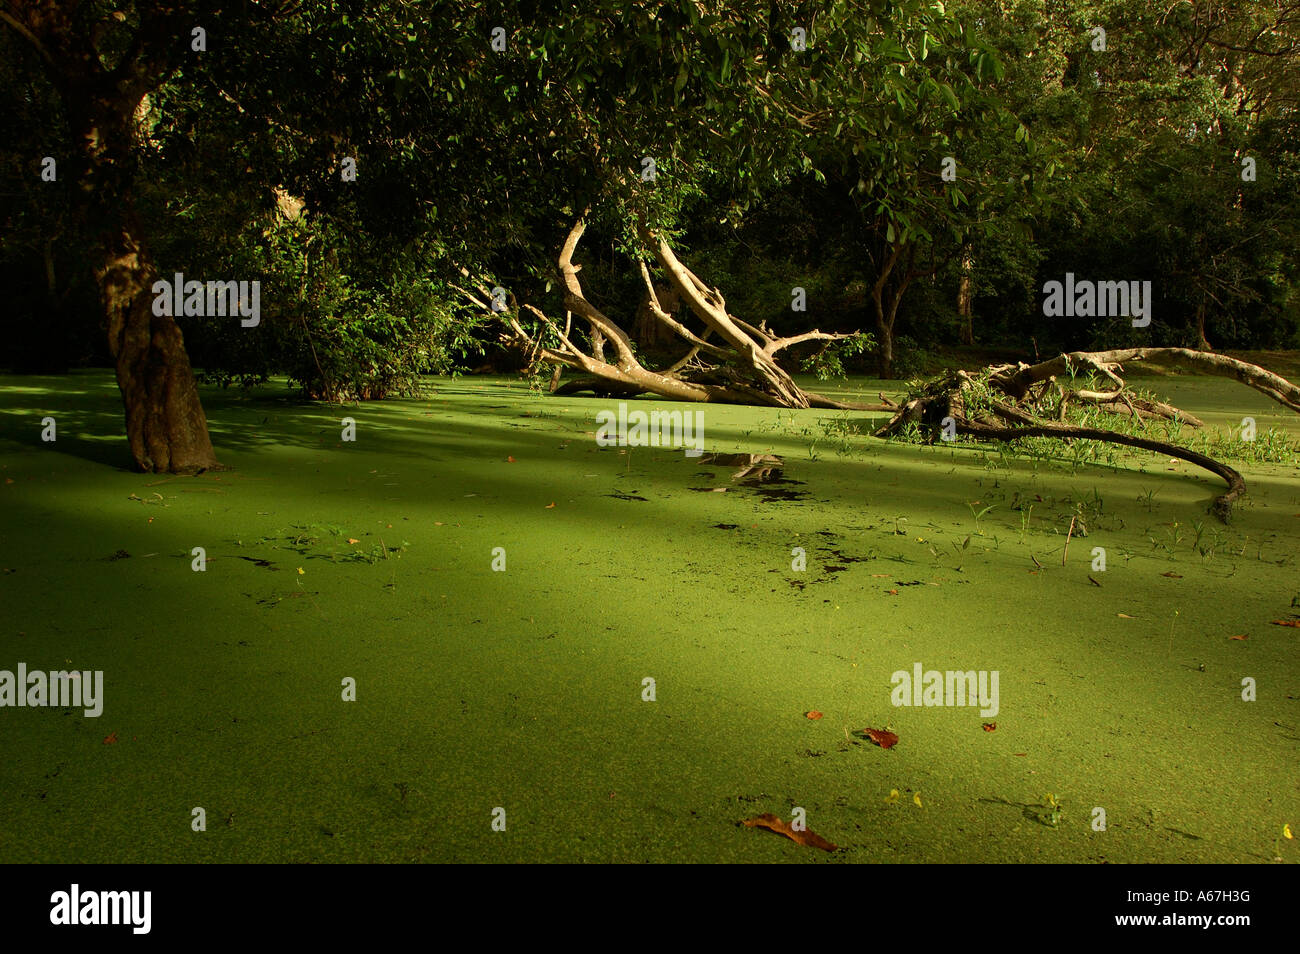 A green foliage covers the flooded gardens of Angkor Wat (or Angkor Vat) - Khmer temple,  Angkor, Cambodia. Stock Photo